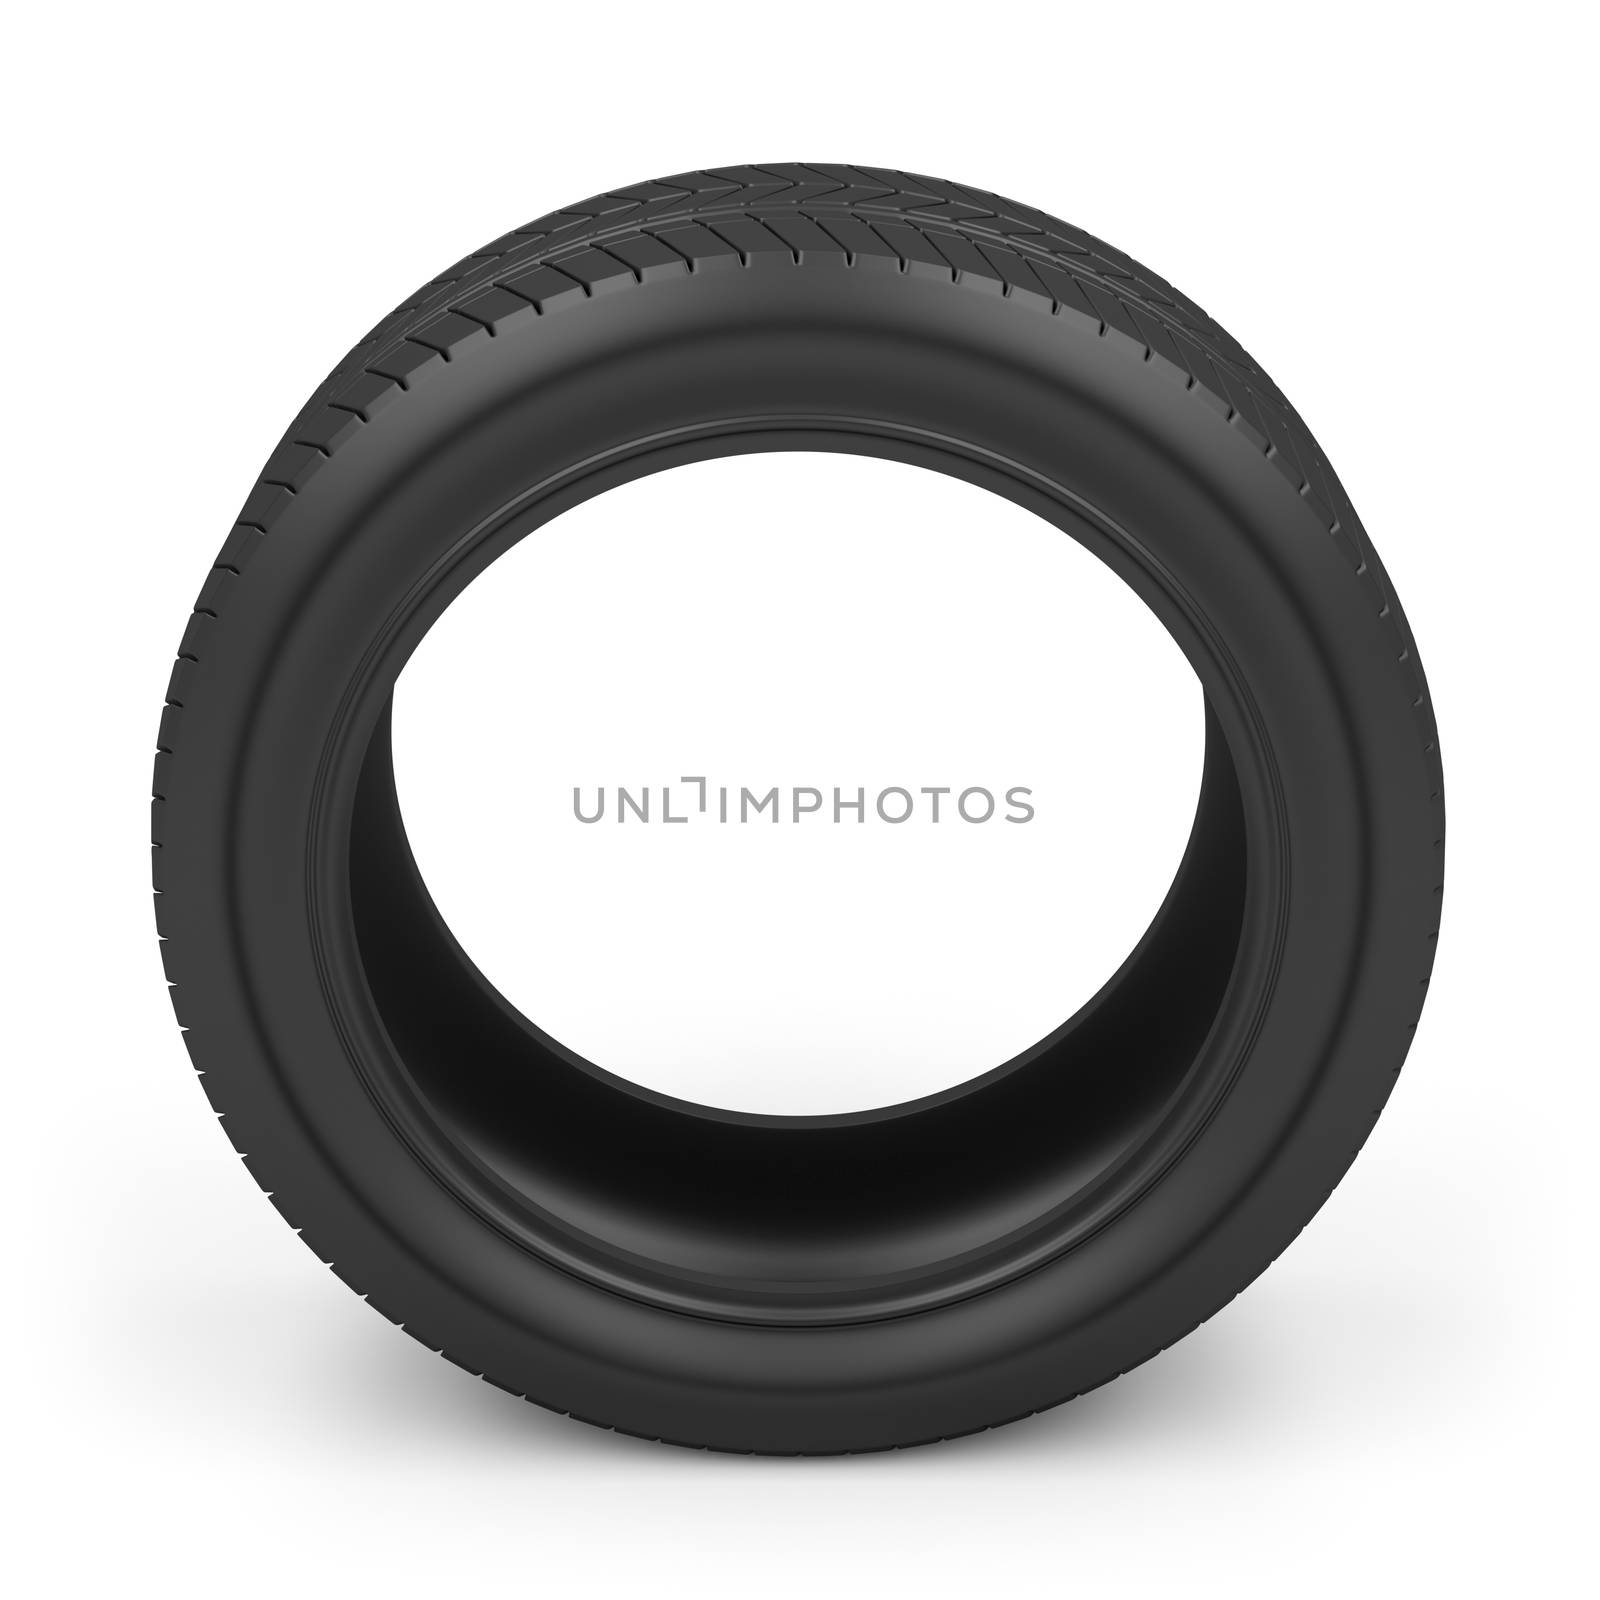 Automobile tire by magraphics